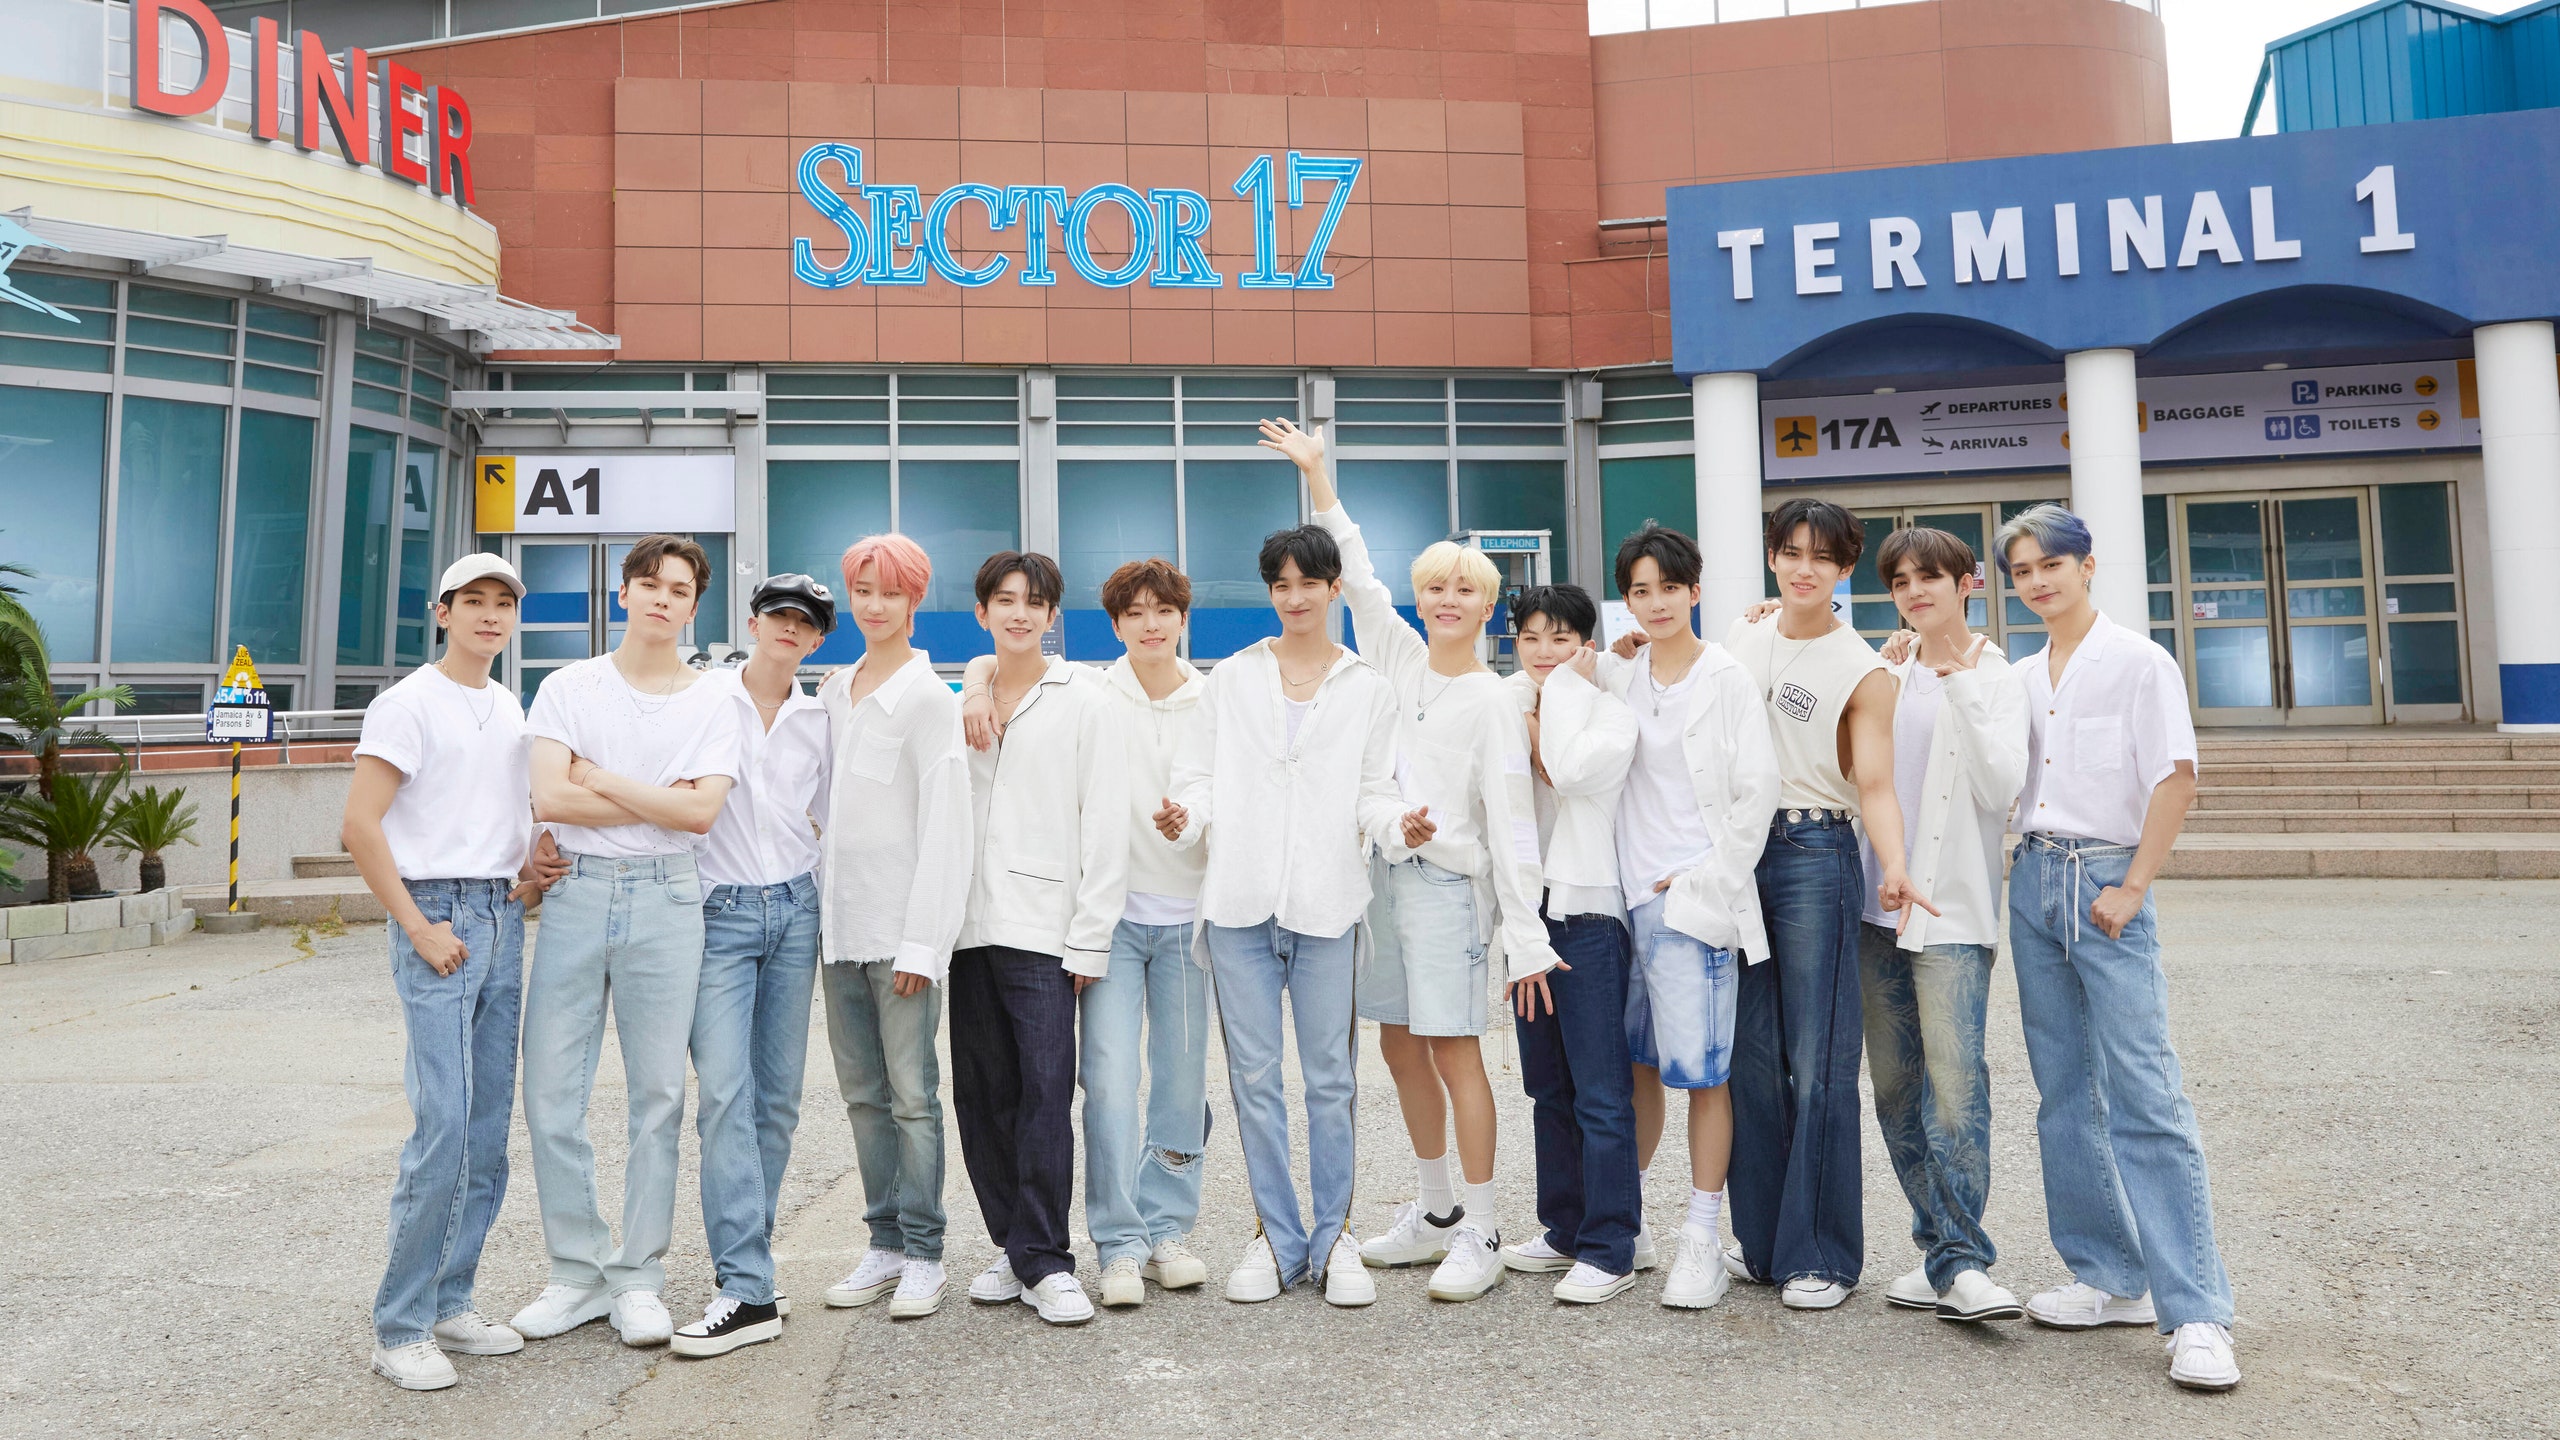 SEVENTEEN Discuss Second Repackage Album “Sector 17” and “Be The Sun Tour